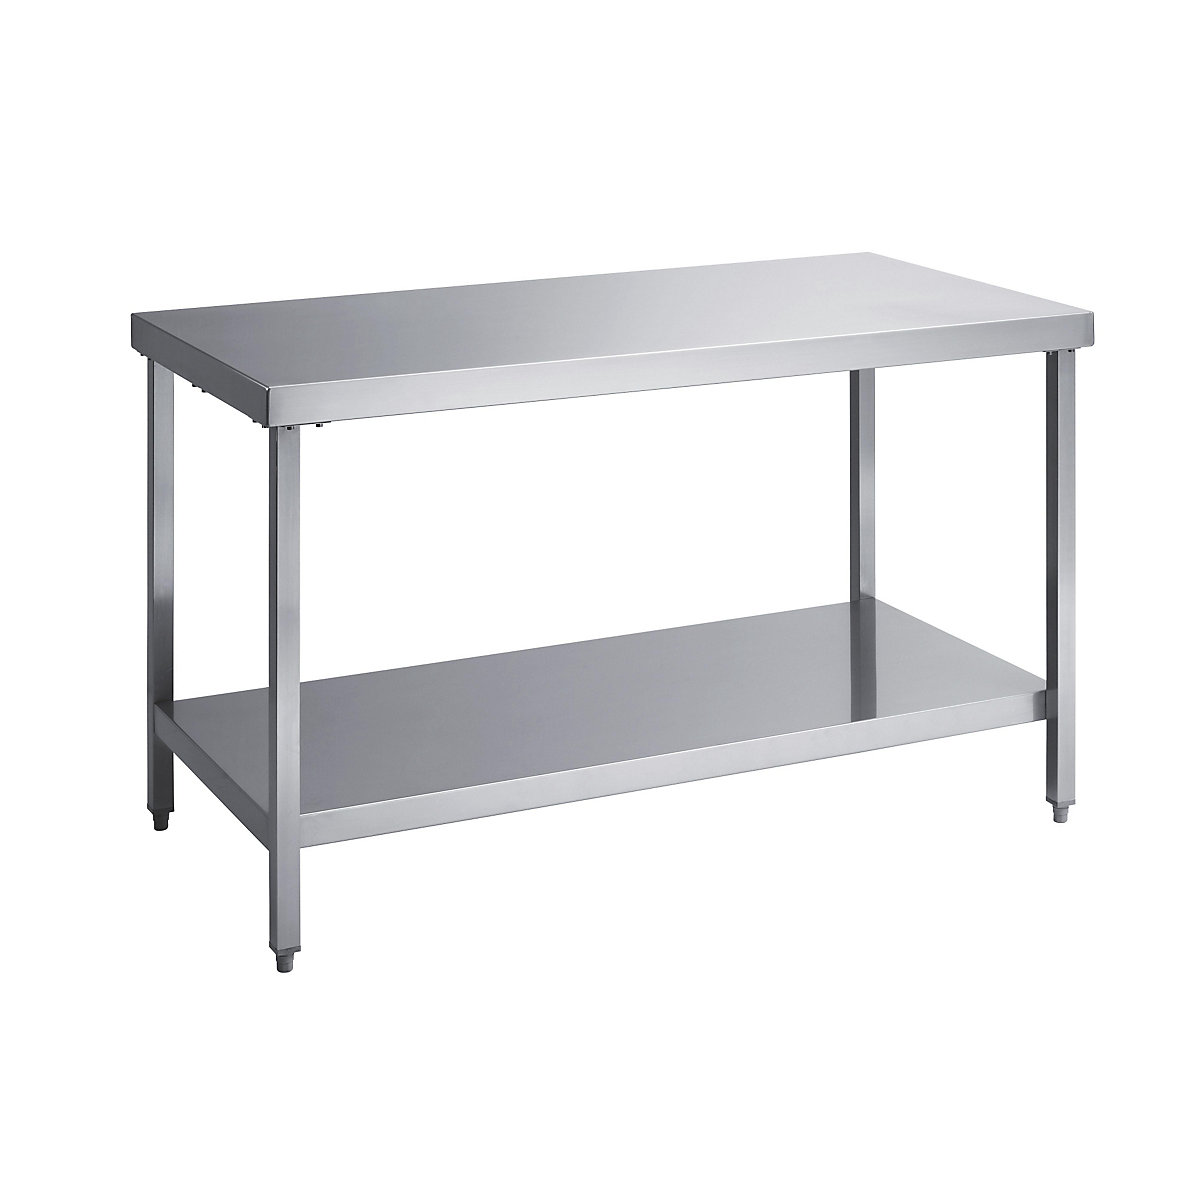 Stainless steel workbench, working height 850 mm, WxD 1400 x 700 mm, with shelf-1